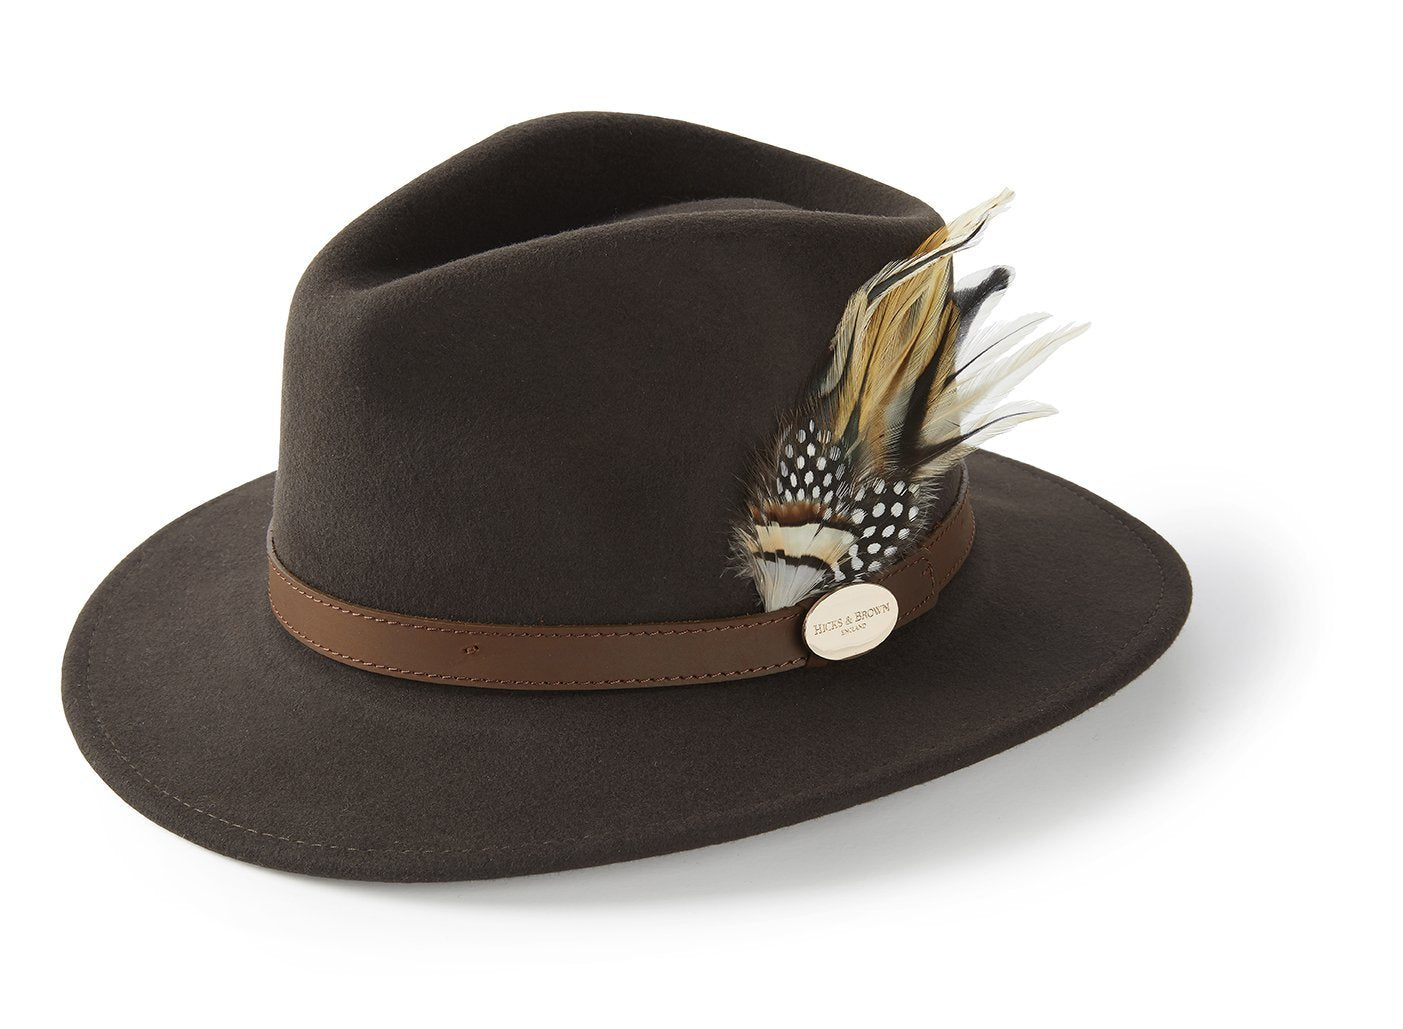 Hicks & Brown Fedora The Suffolk Fedora in Dark Brown (Guinea and Pheasant Feather)